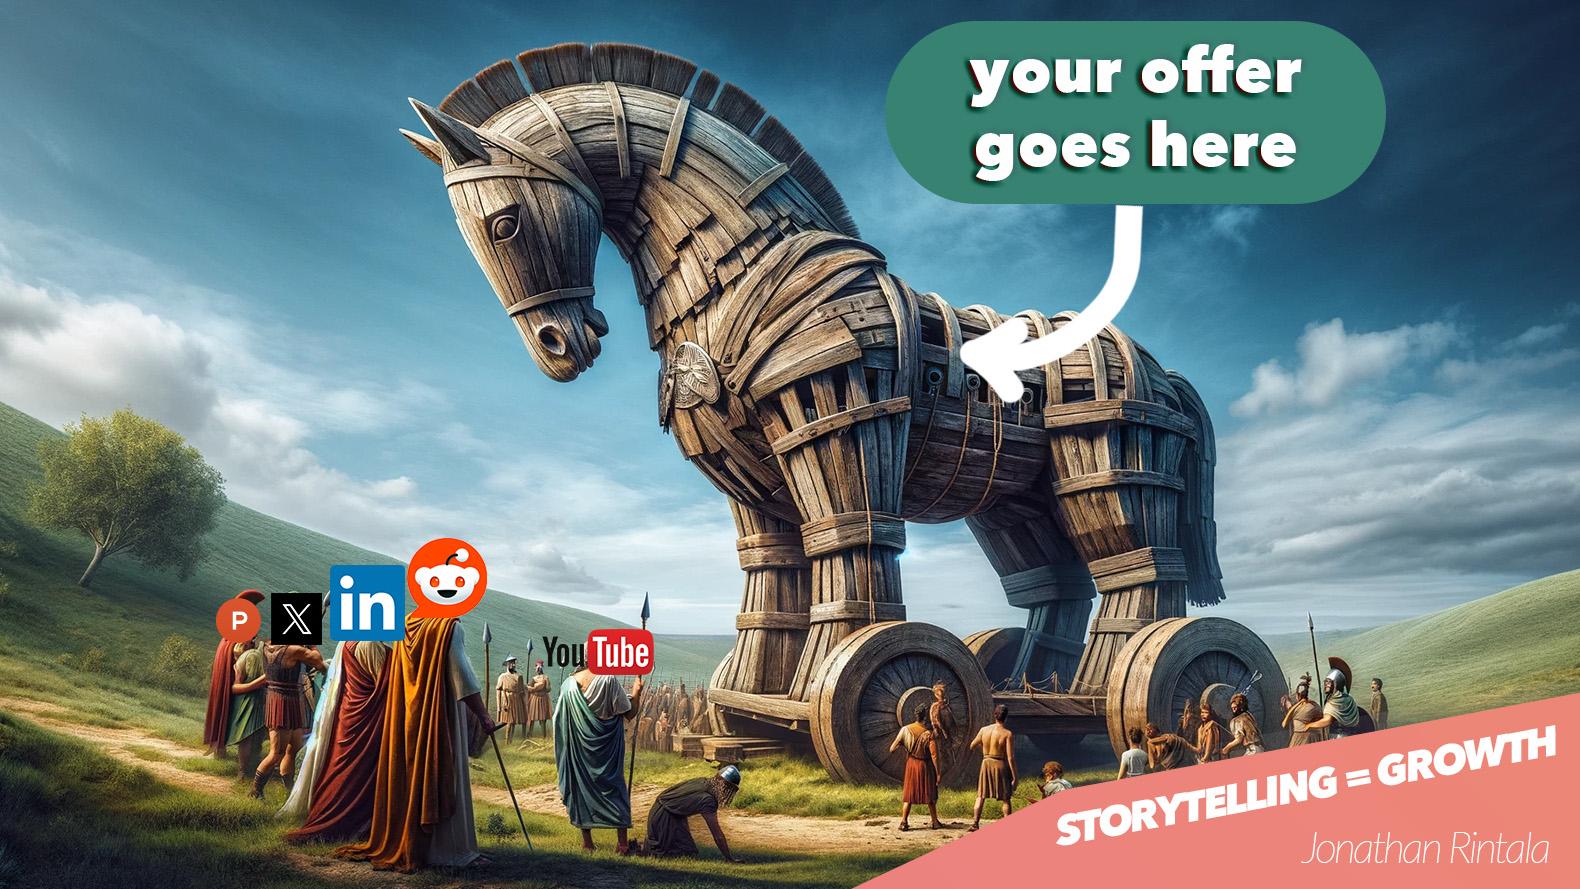 Storytelling as growth marketing - Place your offer in the Trojan Horse